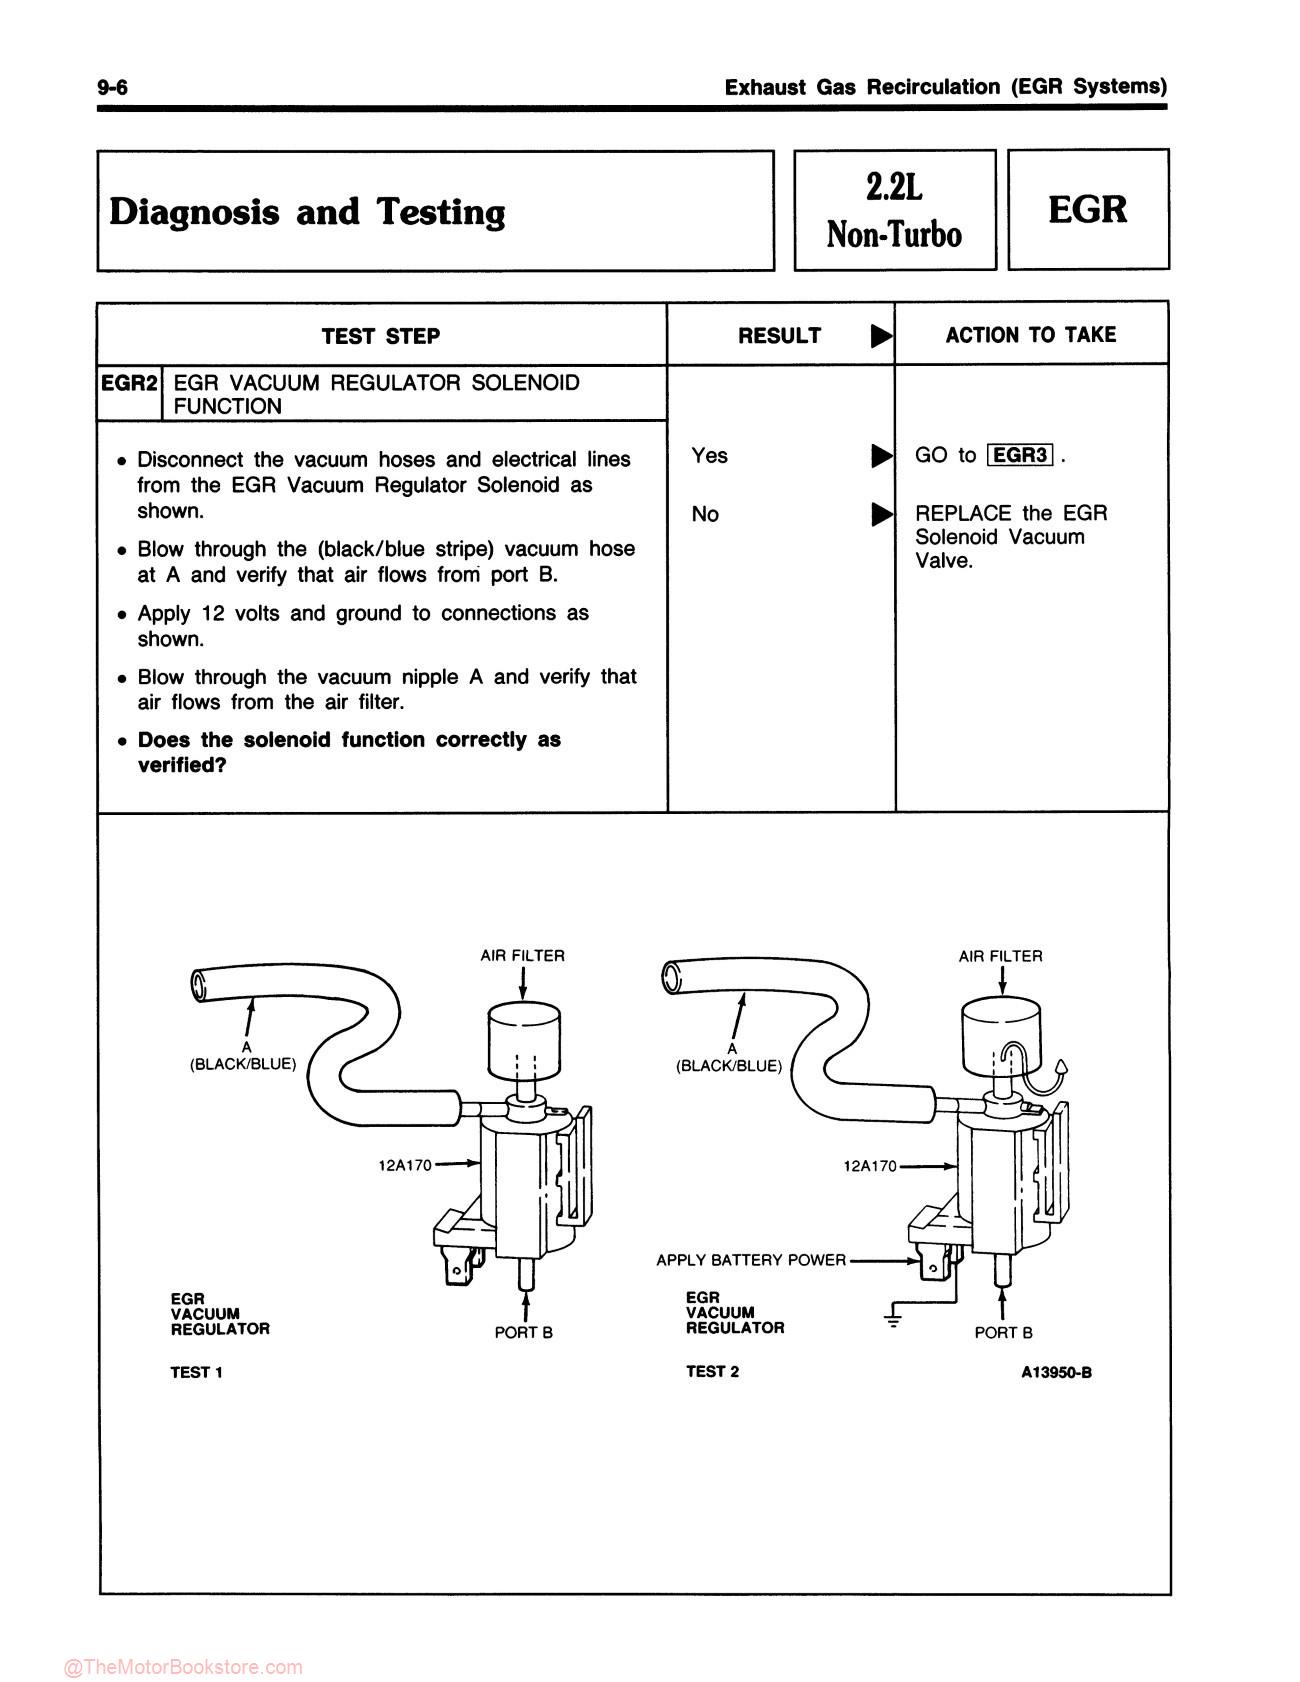 1991 Ford Engine / Emissions Diagnosis Shop Manual - Cars & Trucks - Sample Page 3